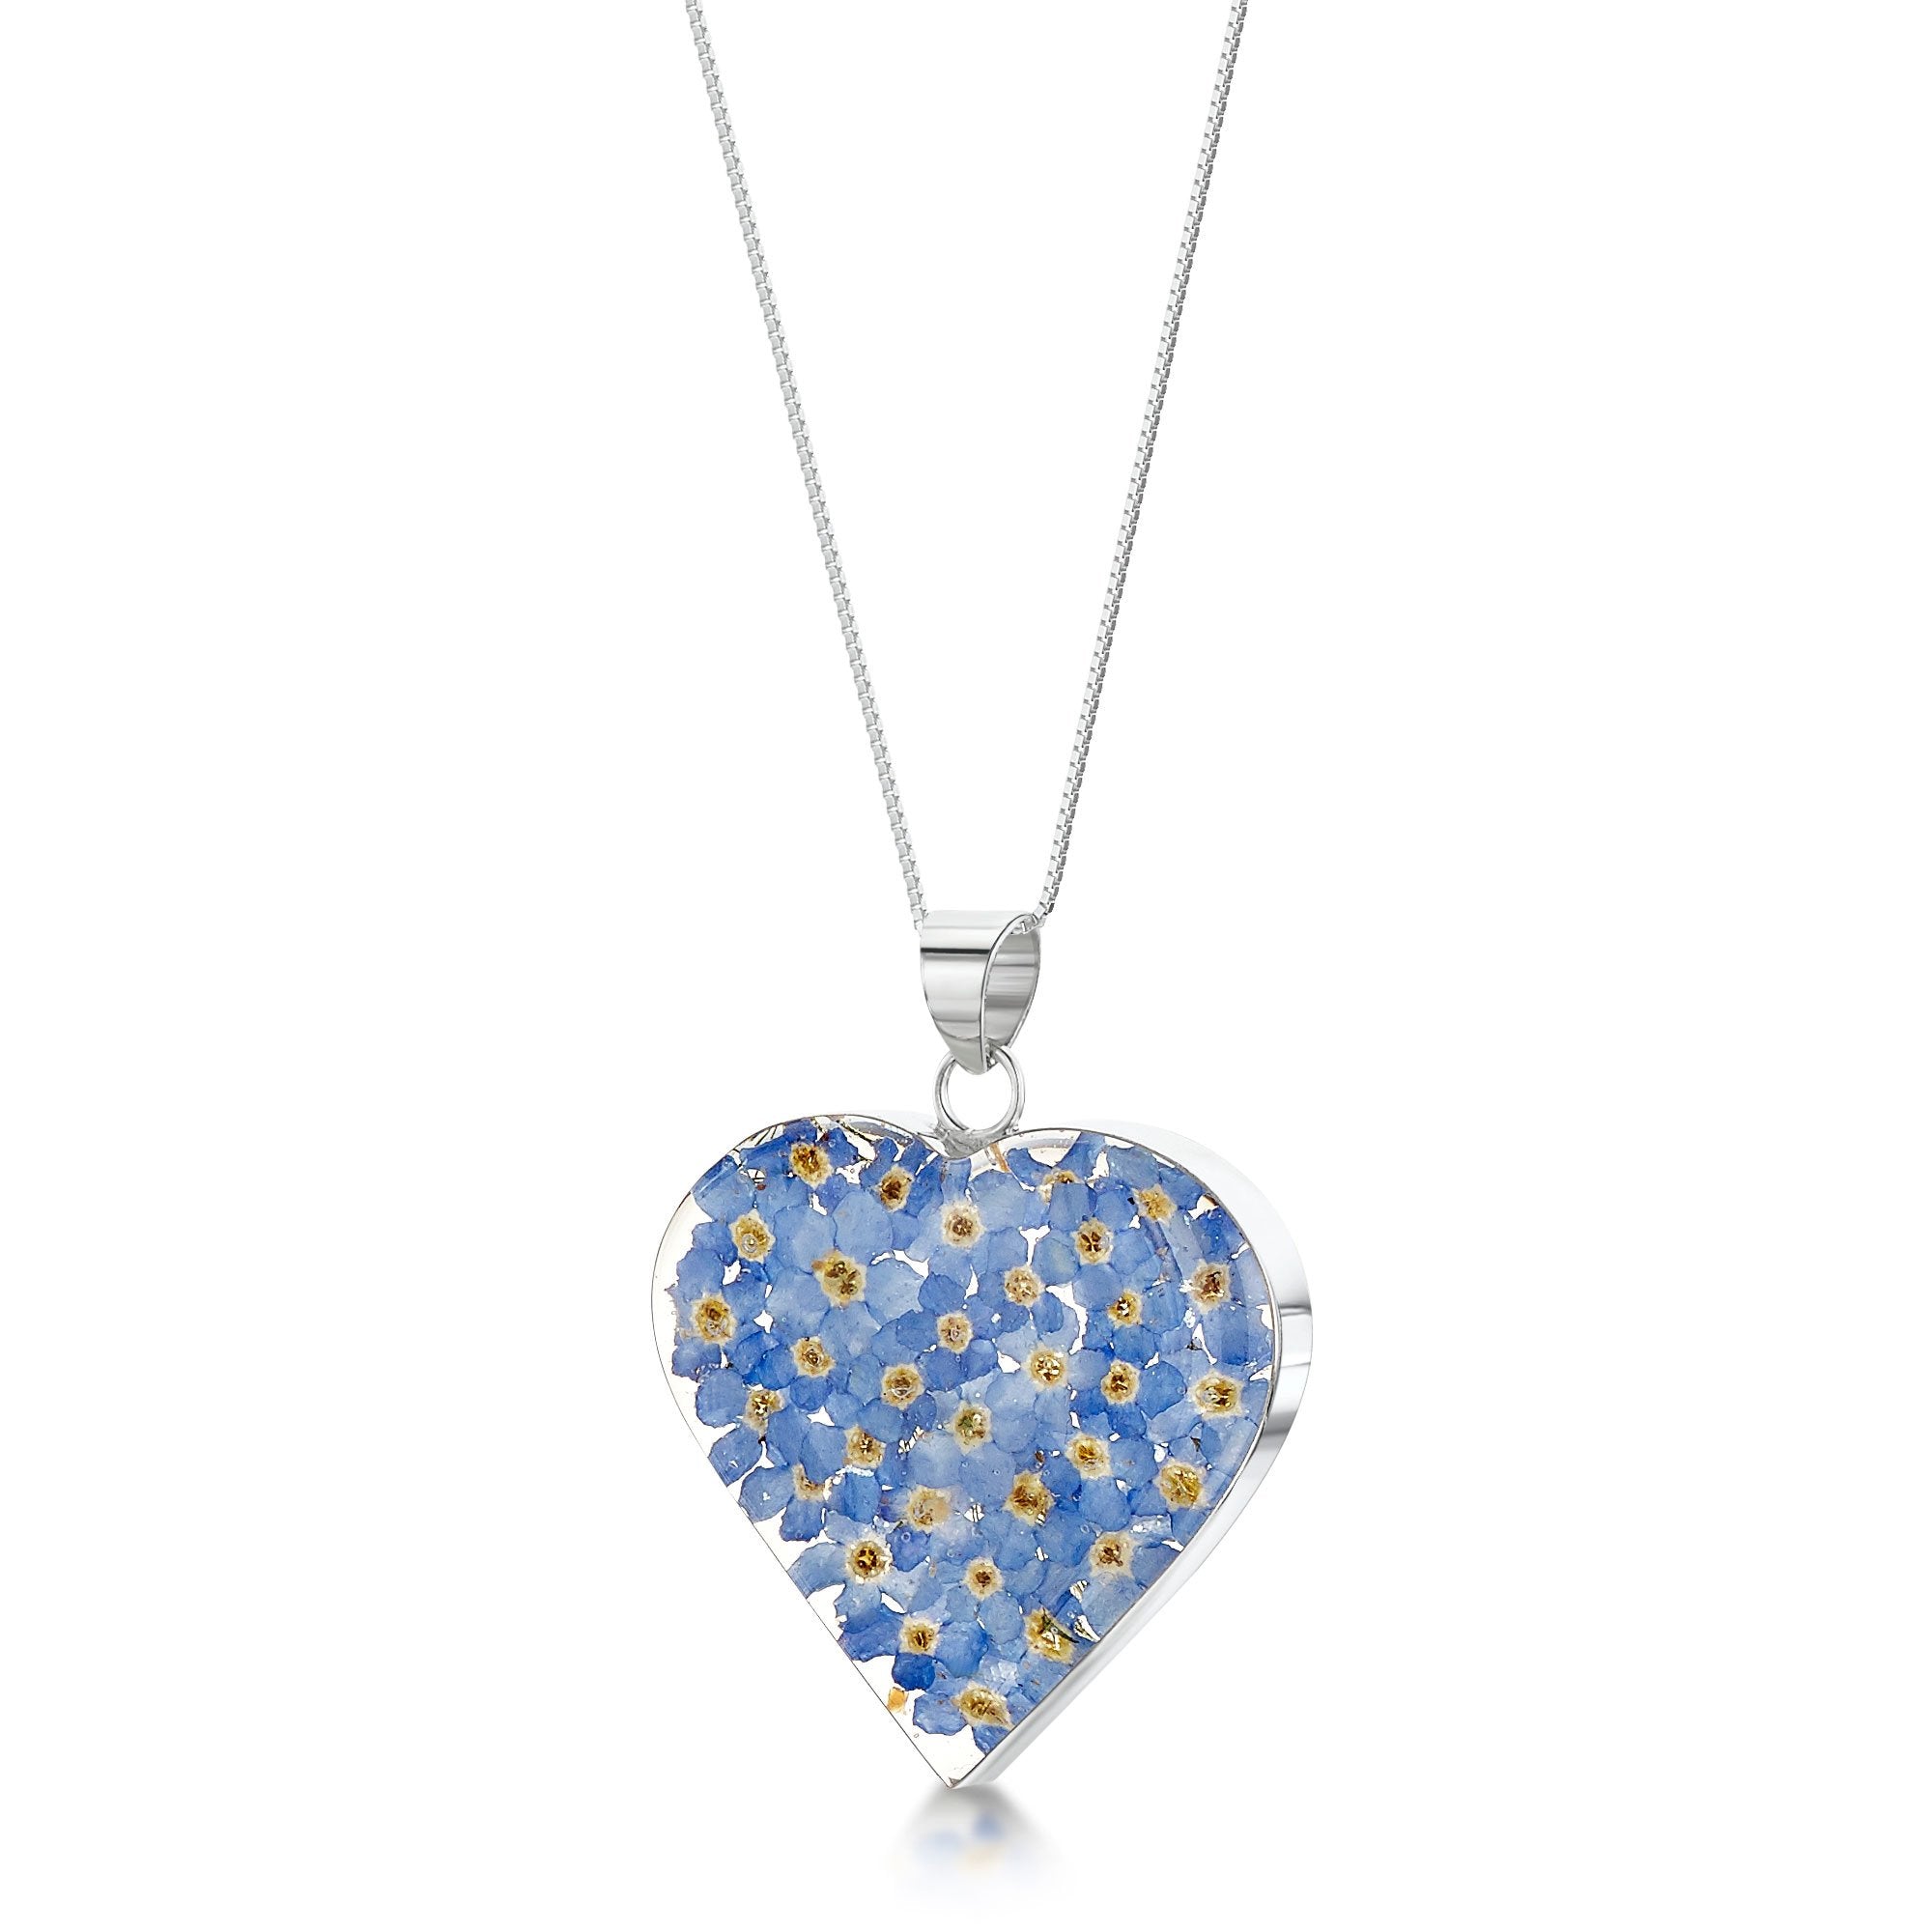 Shrieking Violet - Forget Me Not Collection - Large Heart Necklace